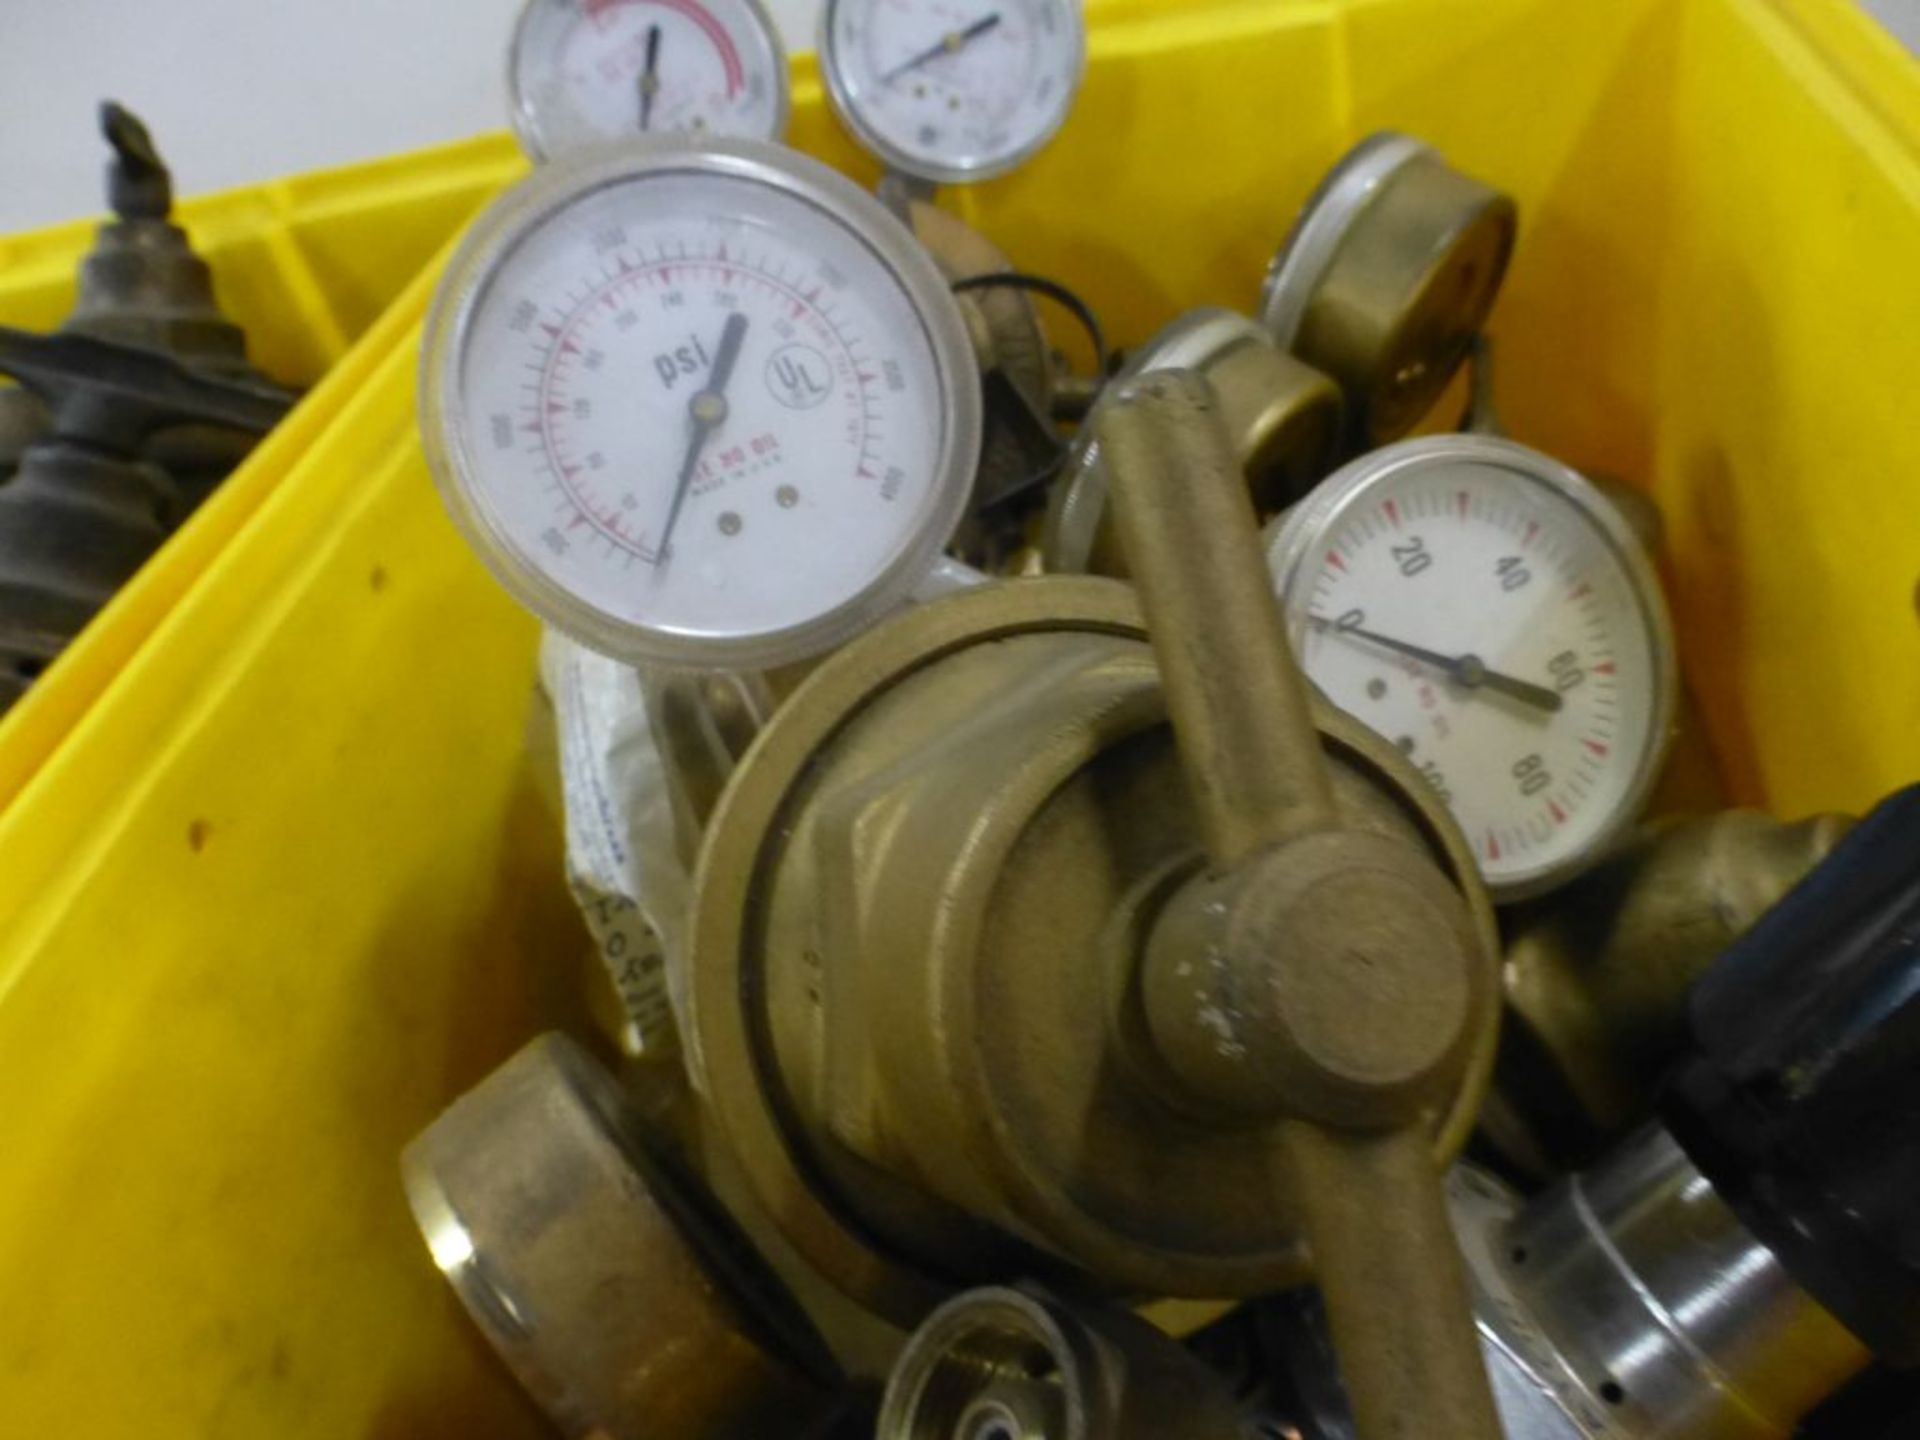 Lot of Assorted Regulators - Brands Include: Victor; Airgas Inc; Tag: 214922 - Image 3 of 4